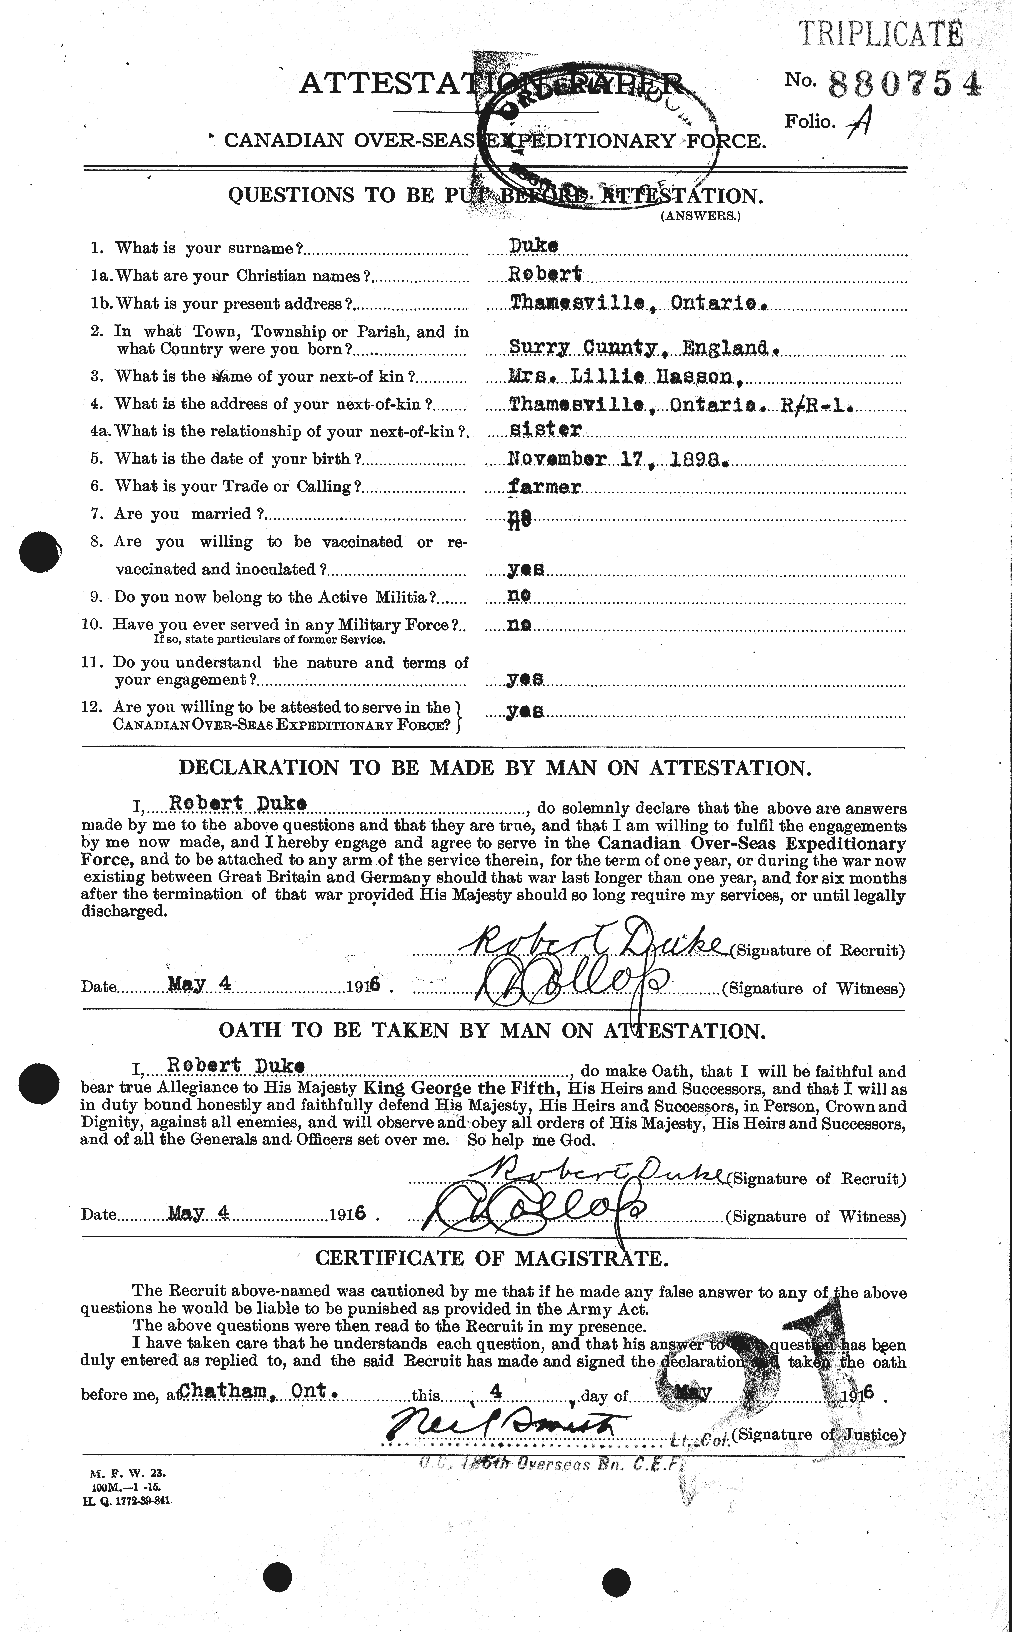 Personnel Records of the First World War - CEF 302048a